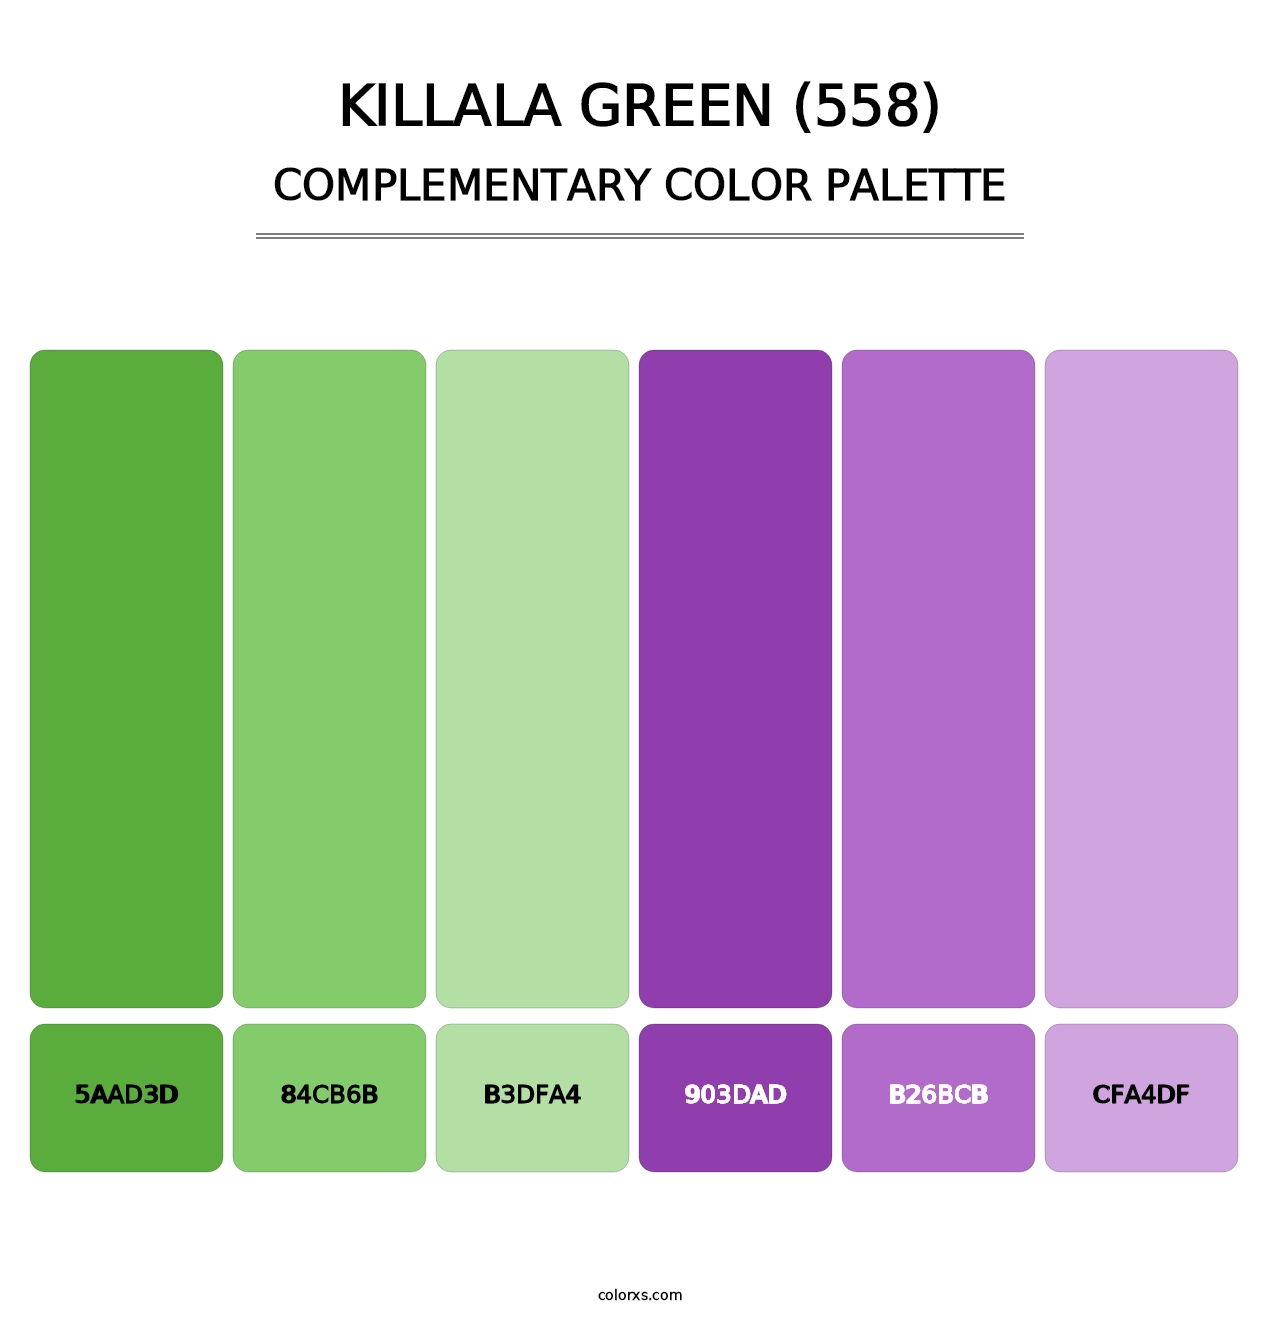 Killala Green (558) - Complementary Color Palette